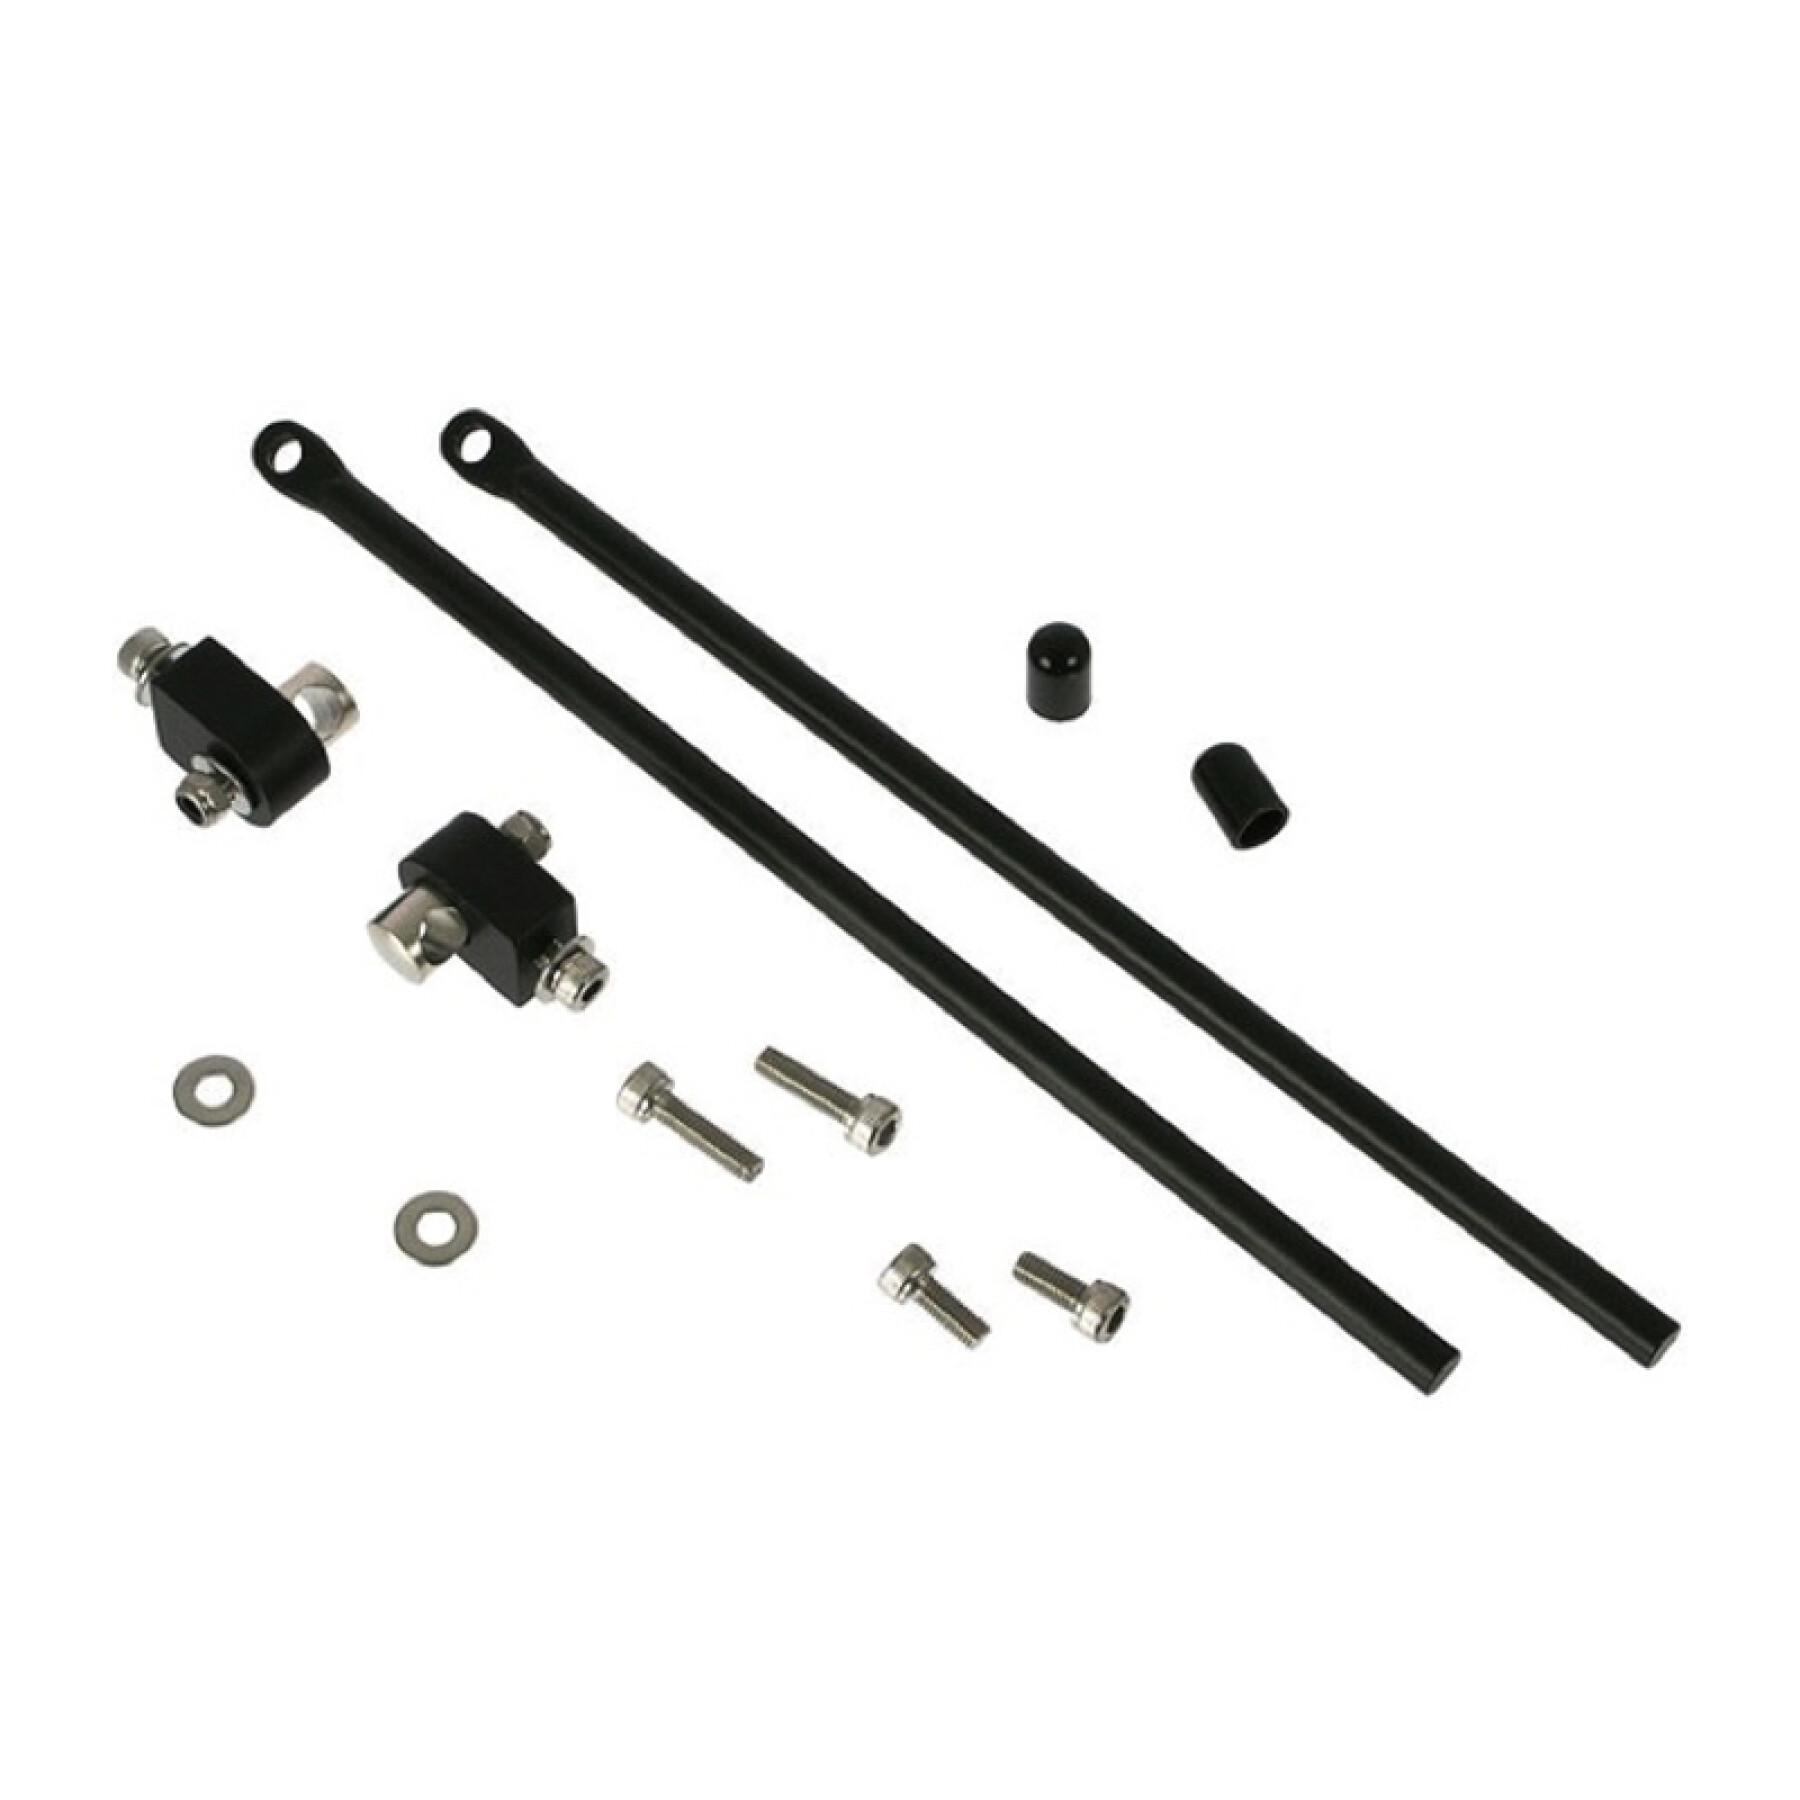 Mounting kit for 2 rods with silver fasteners Tubus